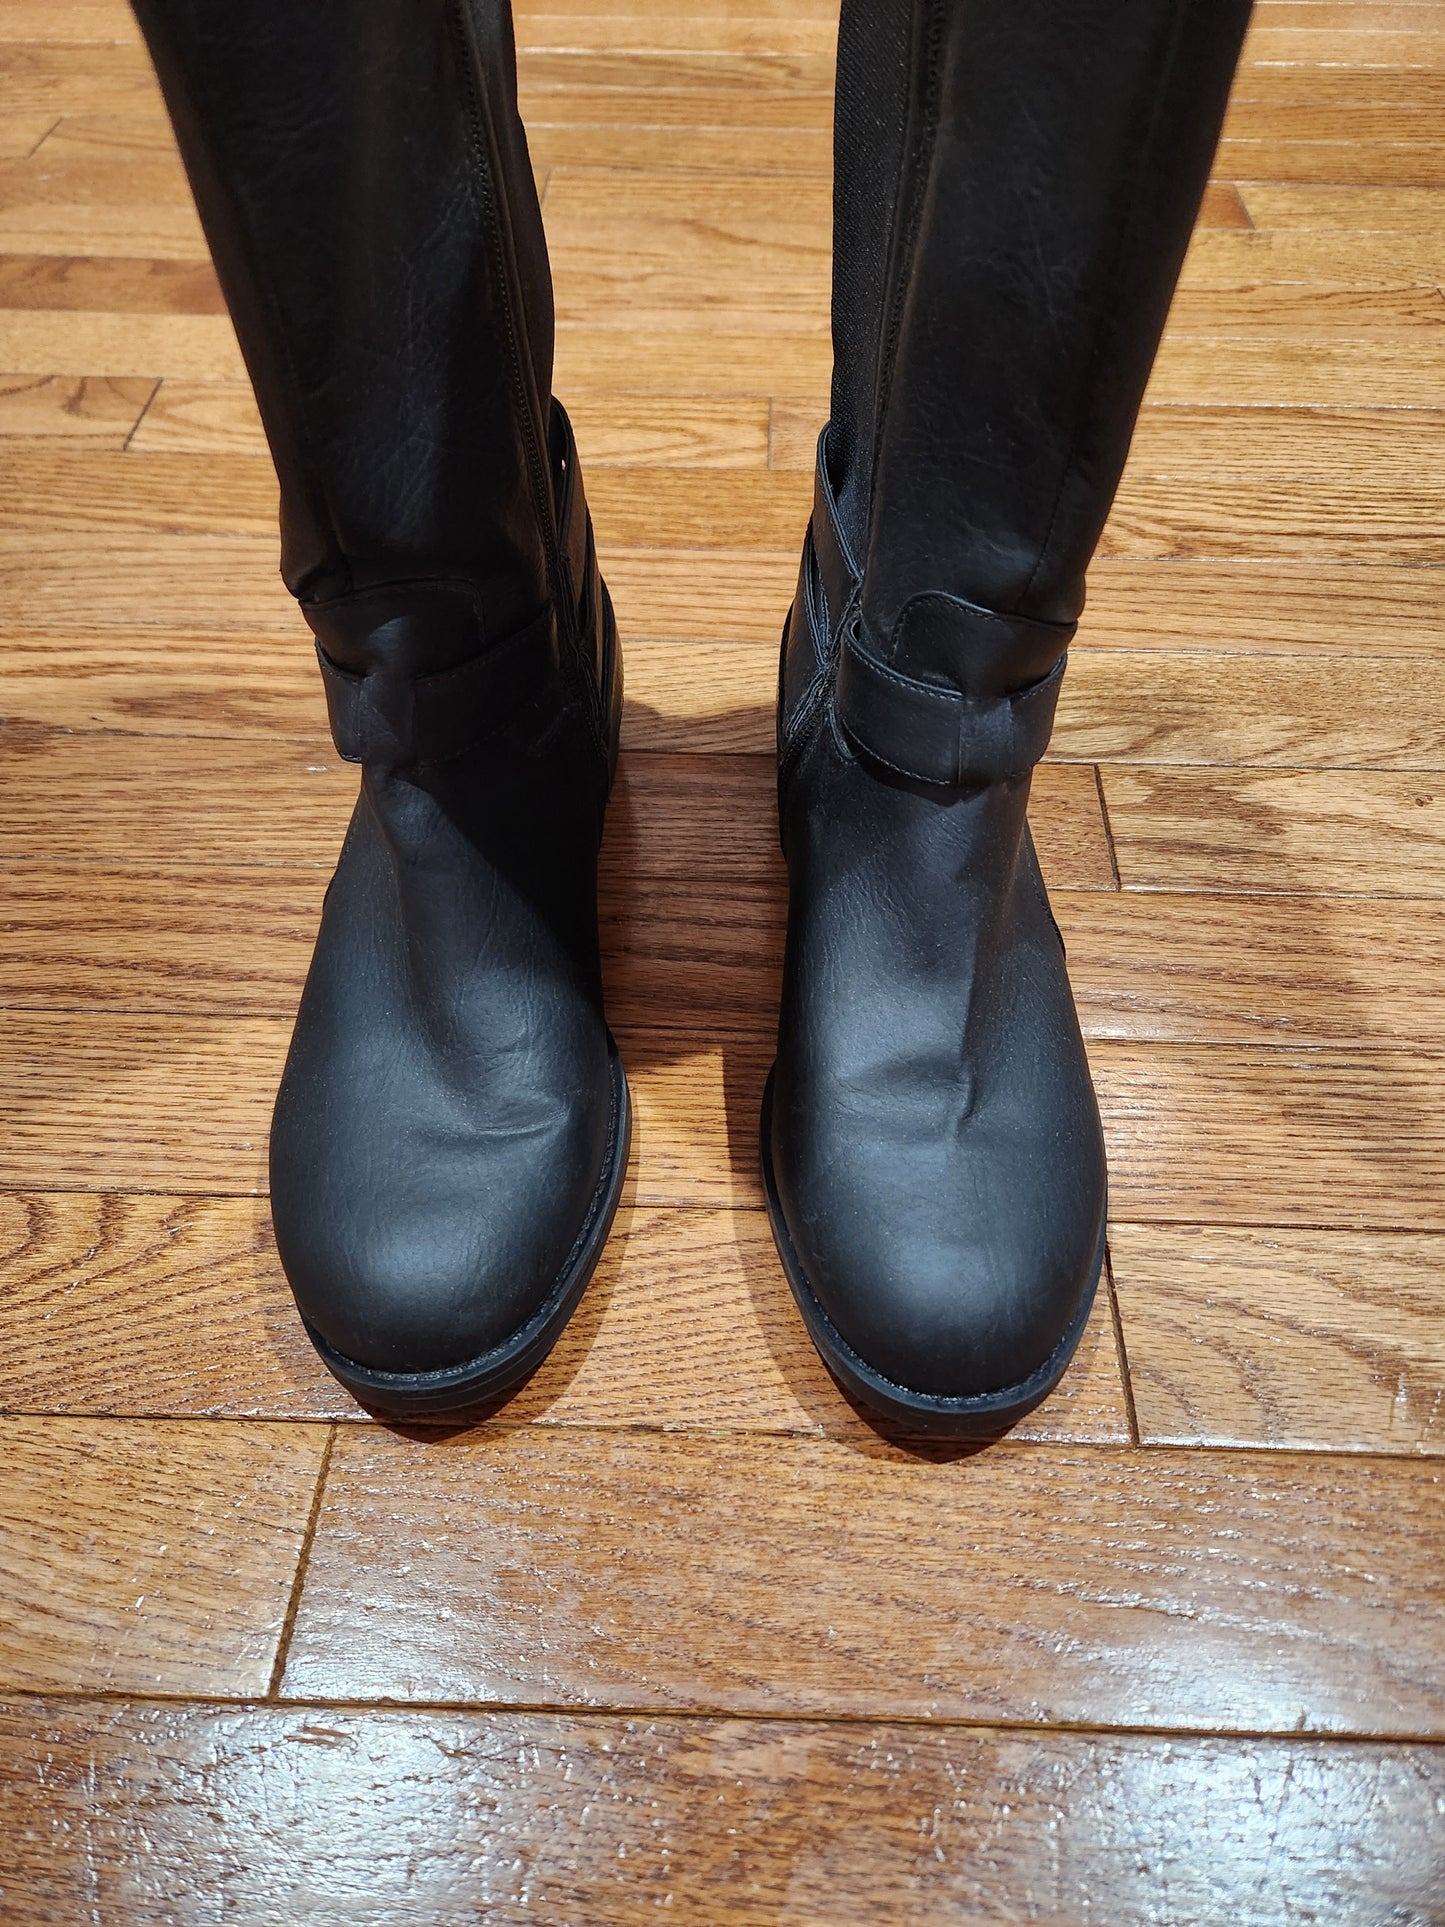 Boots Knee Flats By Kenneth Cole Reaction  Size: 7.5